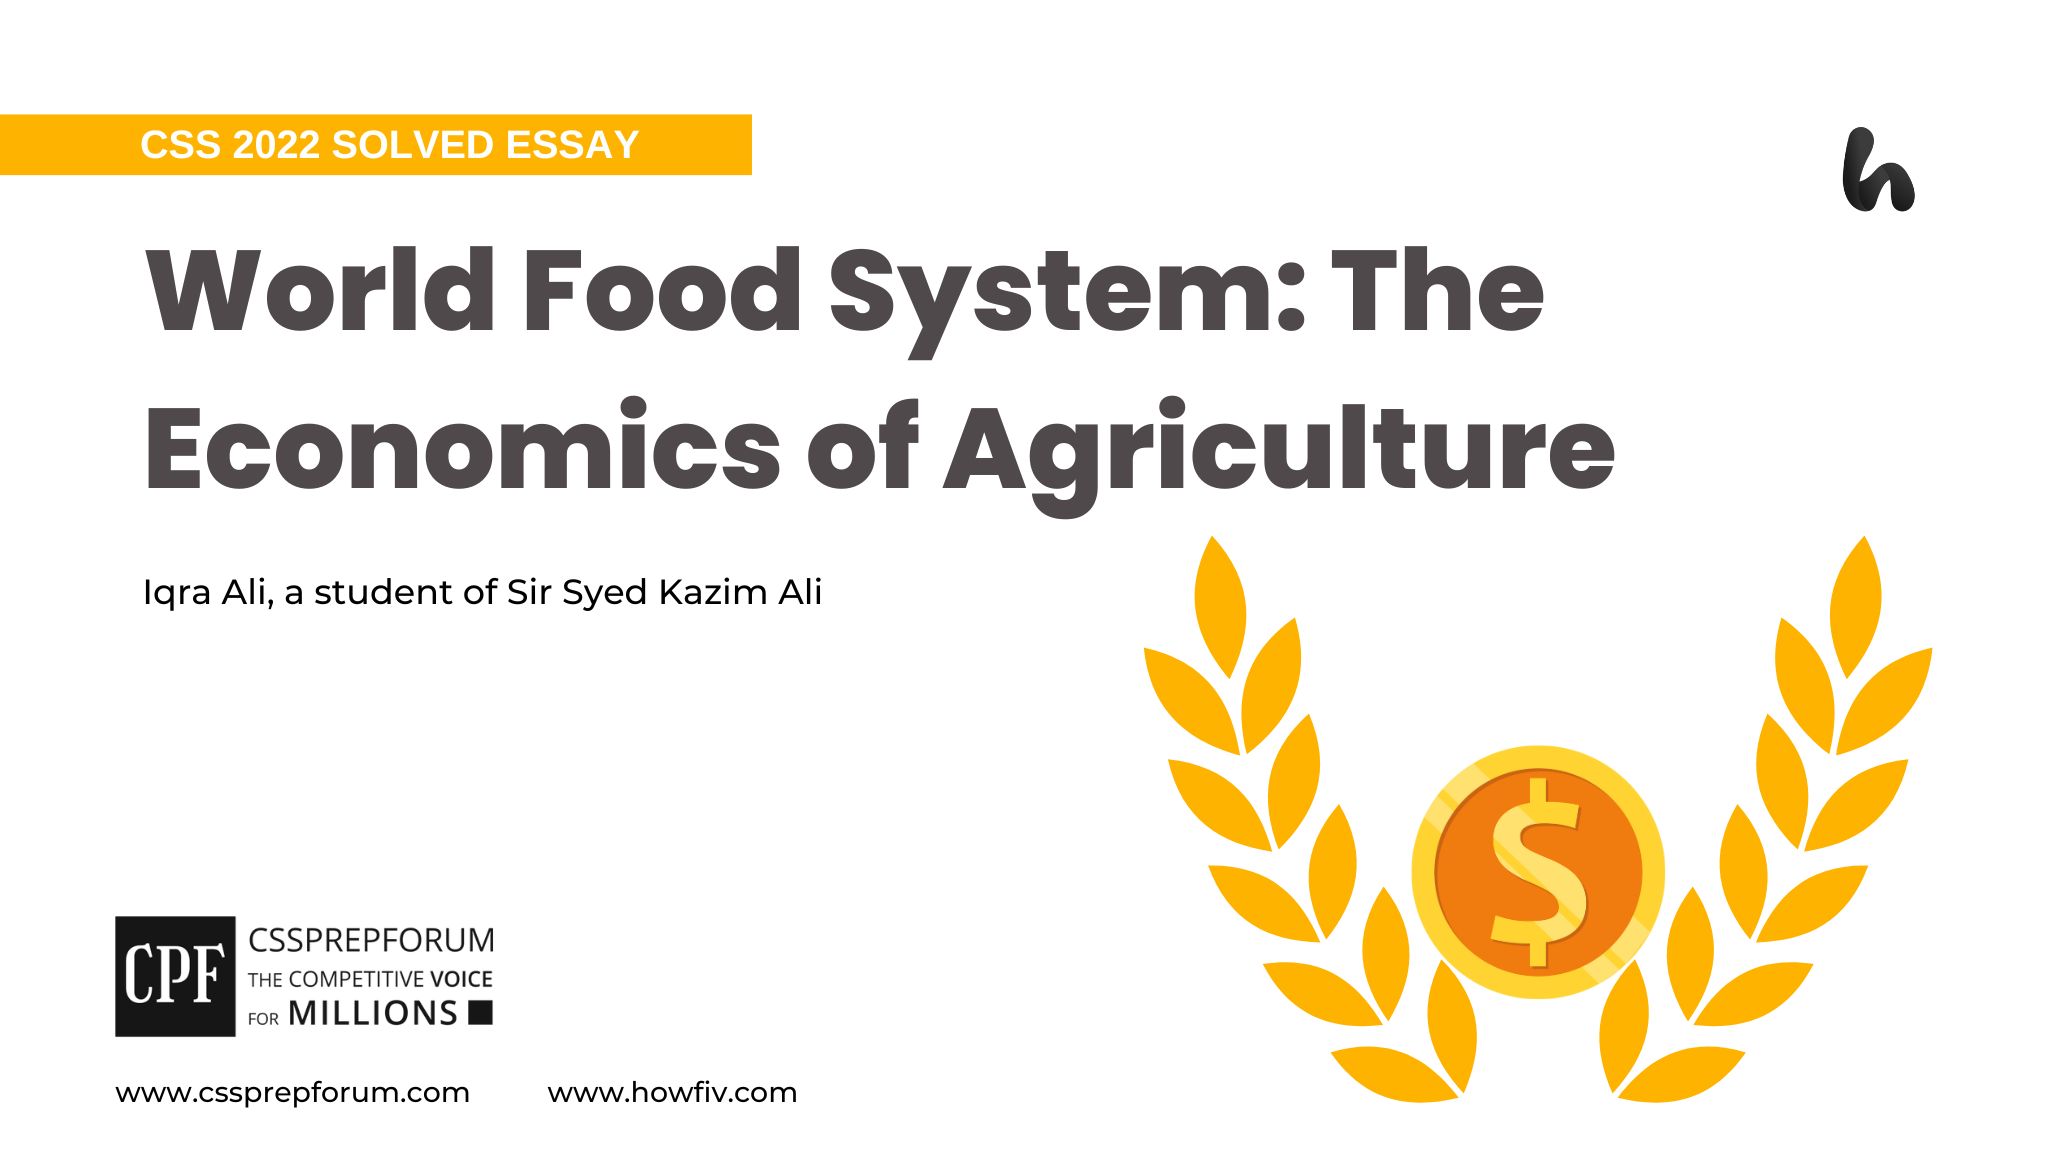 World Food System: The Economics of Agriculture by Iqra Ali